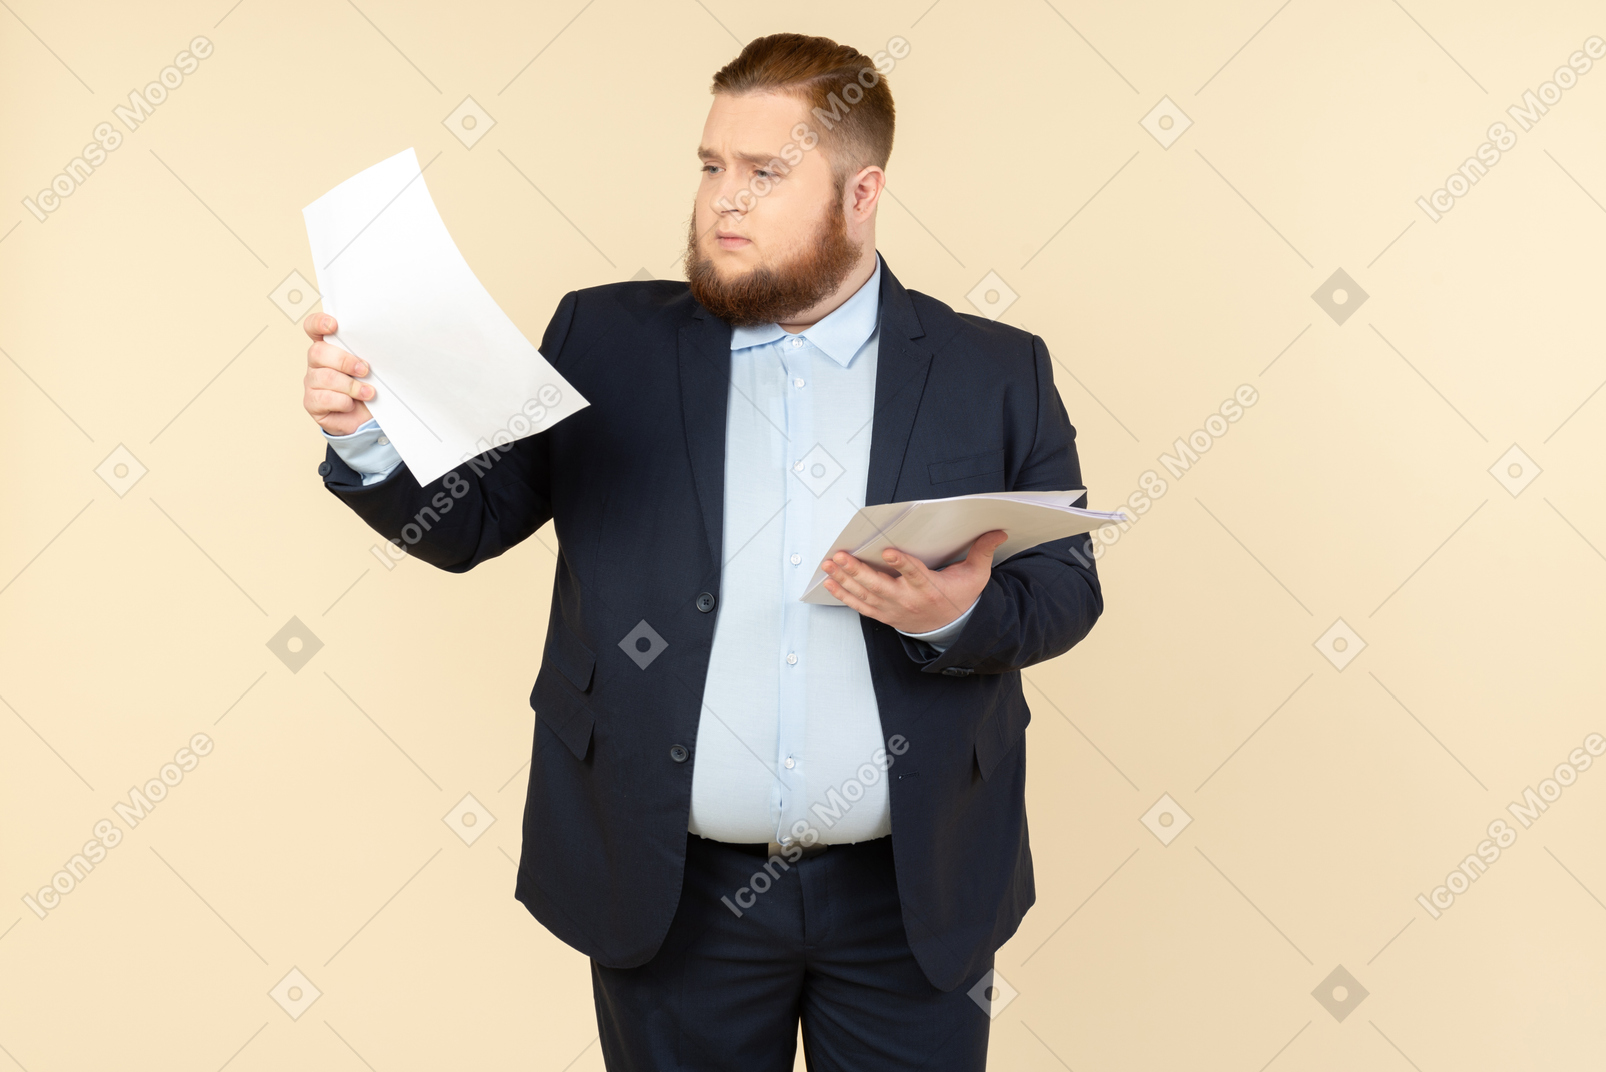 Overweight male office worker revising documents